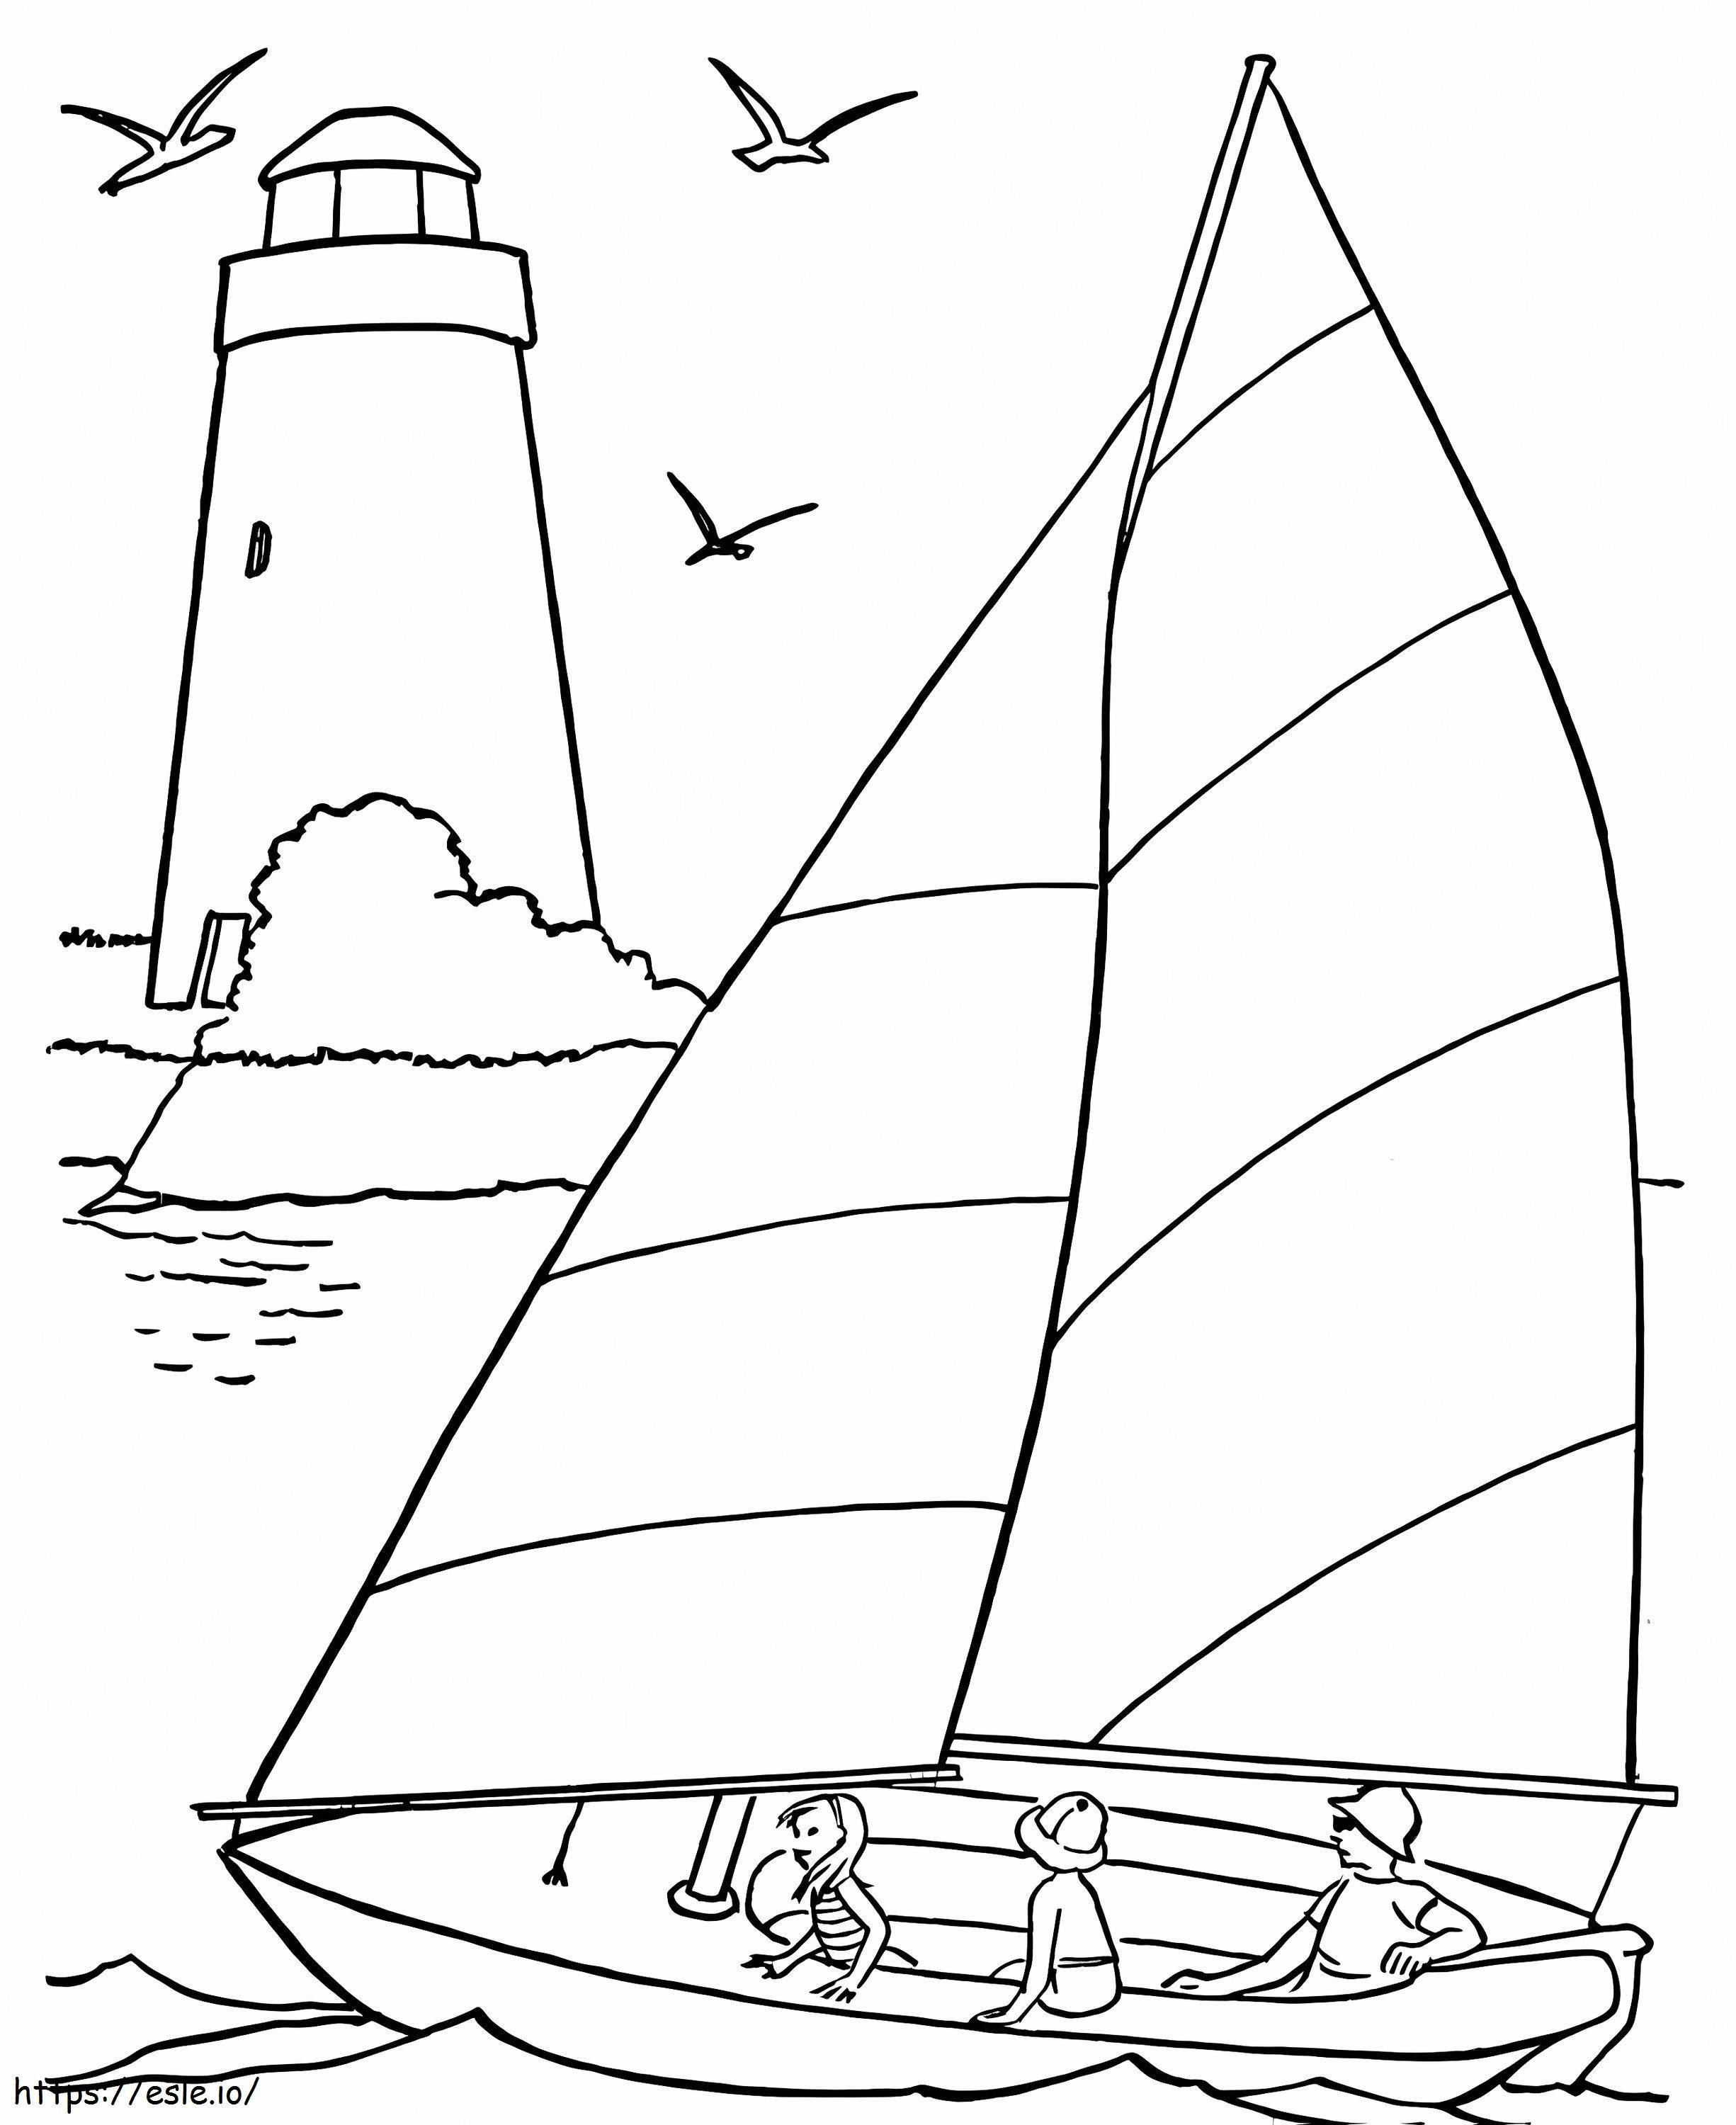 Family On Boat coloring page